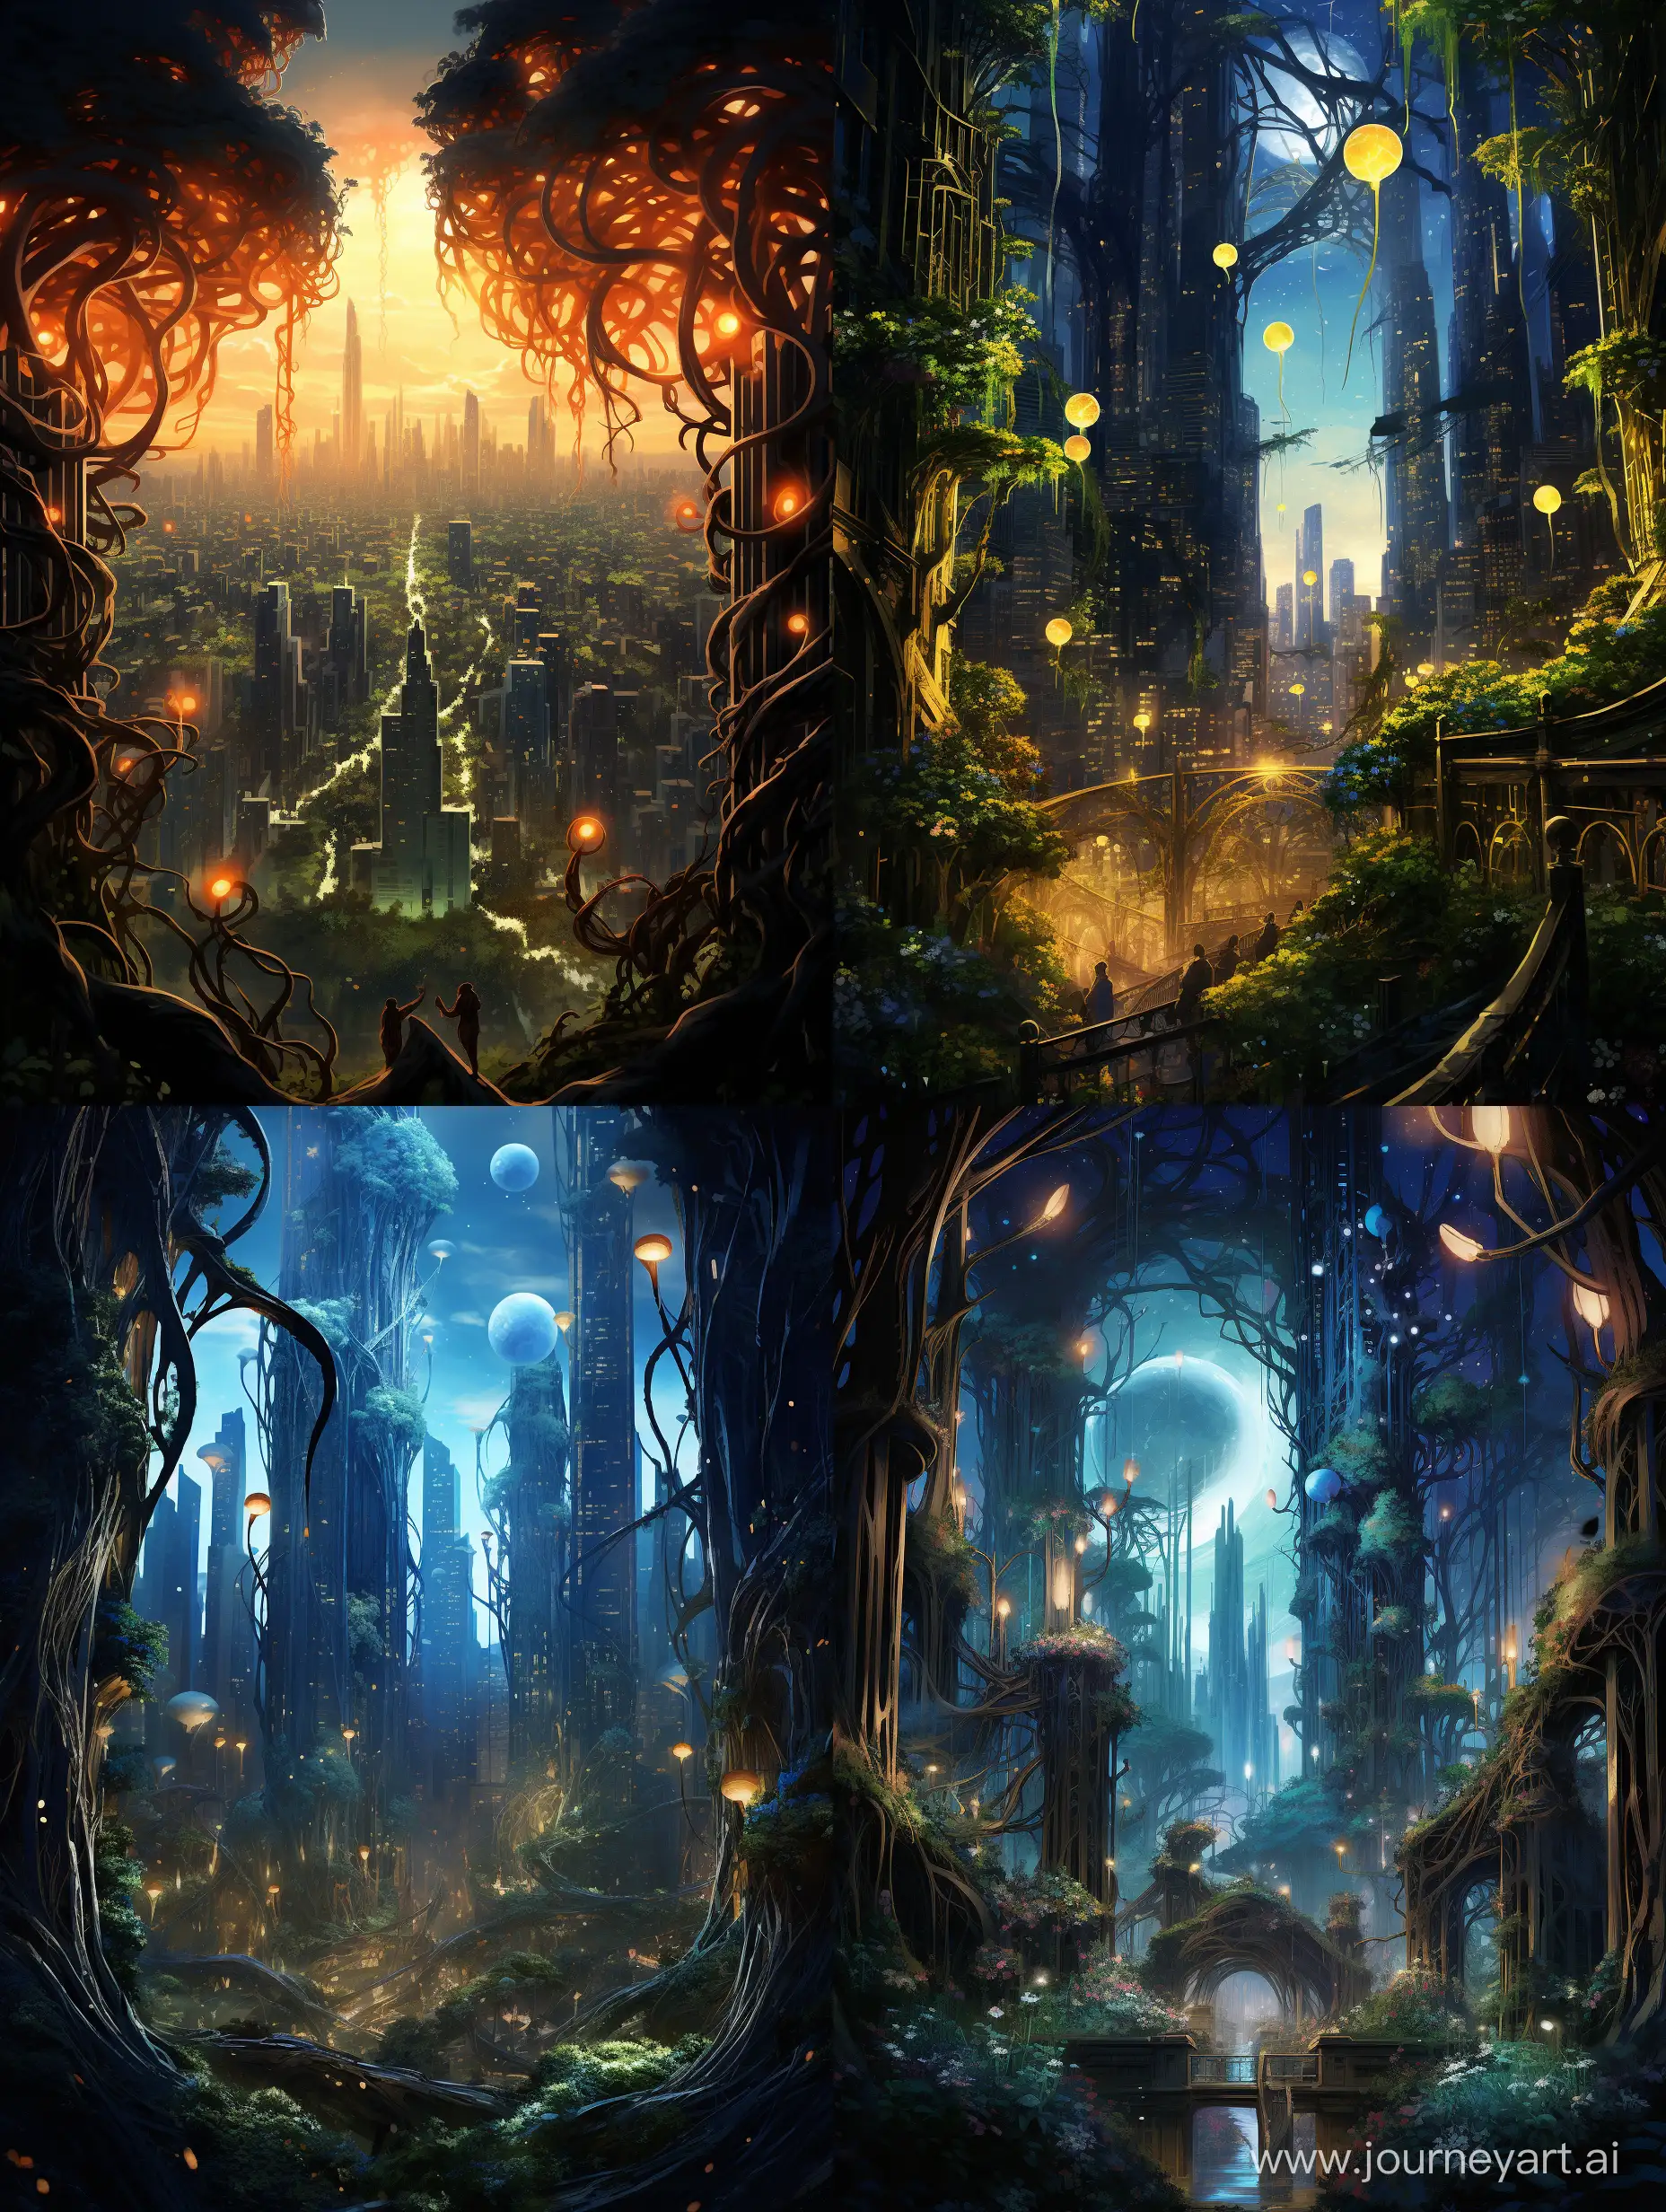 Imagine a cityscape where skyscrapers are intertwined with colossal, glowing vines that reach towards the stars.